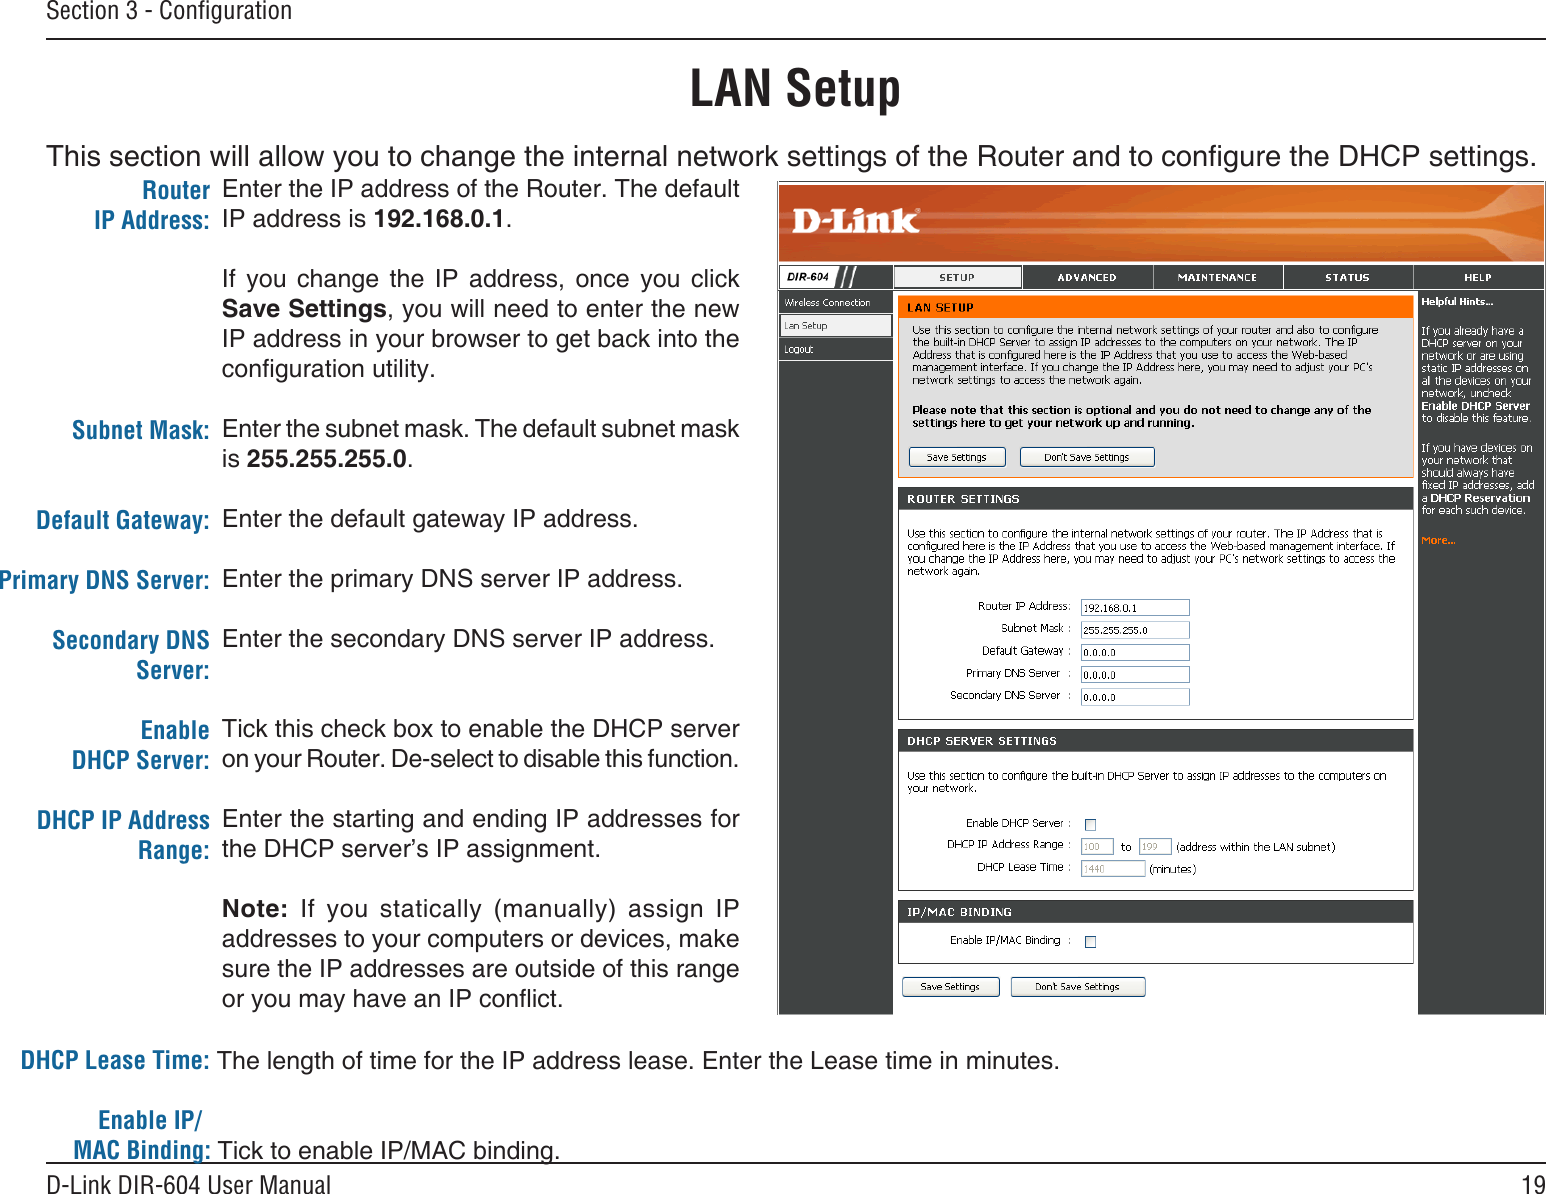 19D-Link DIR-604 User ManualSection 3 - ConﬁgurationLAN SetupThis section will allow you to change the internal network settings of the Router and to congure the DHCP settings.Enter the IP address of the Router. The default IP address is 192.168.0.1.If  you  change  the  IP  address,  once  you  click Save Settings, you will need to enter the new IP address in your browser to get back into the conguration utility.Enter the subnet mask. The default subnet mask is 255.255.255.0.Enter the default gateway IP address.Enter the primary DNS server IP address.Enter the secondary DNS server IP address.Tick this check box to enable the DHCP server on your Router. De-select to disable this function.Enter the starting and ending IP addresses for the DHCP server’s IP assignment.Note:  If  you  statically  (manually)  assign  IP addresses to your computers or devices, make sure the IP addresses are outside of this range or you may have an IP conict.Router IP Address:Subnet Mask:Default Gateway:Primary DNS Server:Secondary DNS Server:Enable DHCP Server:DHCP IP Address  Range:DHCP Lease Time:                               The length of time for the IP address lease. Enter the Lease time in minutes.            Enable IP/        MAC Binding: Tick to enable IP/MAC binding.